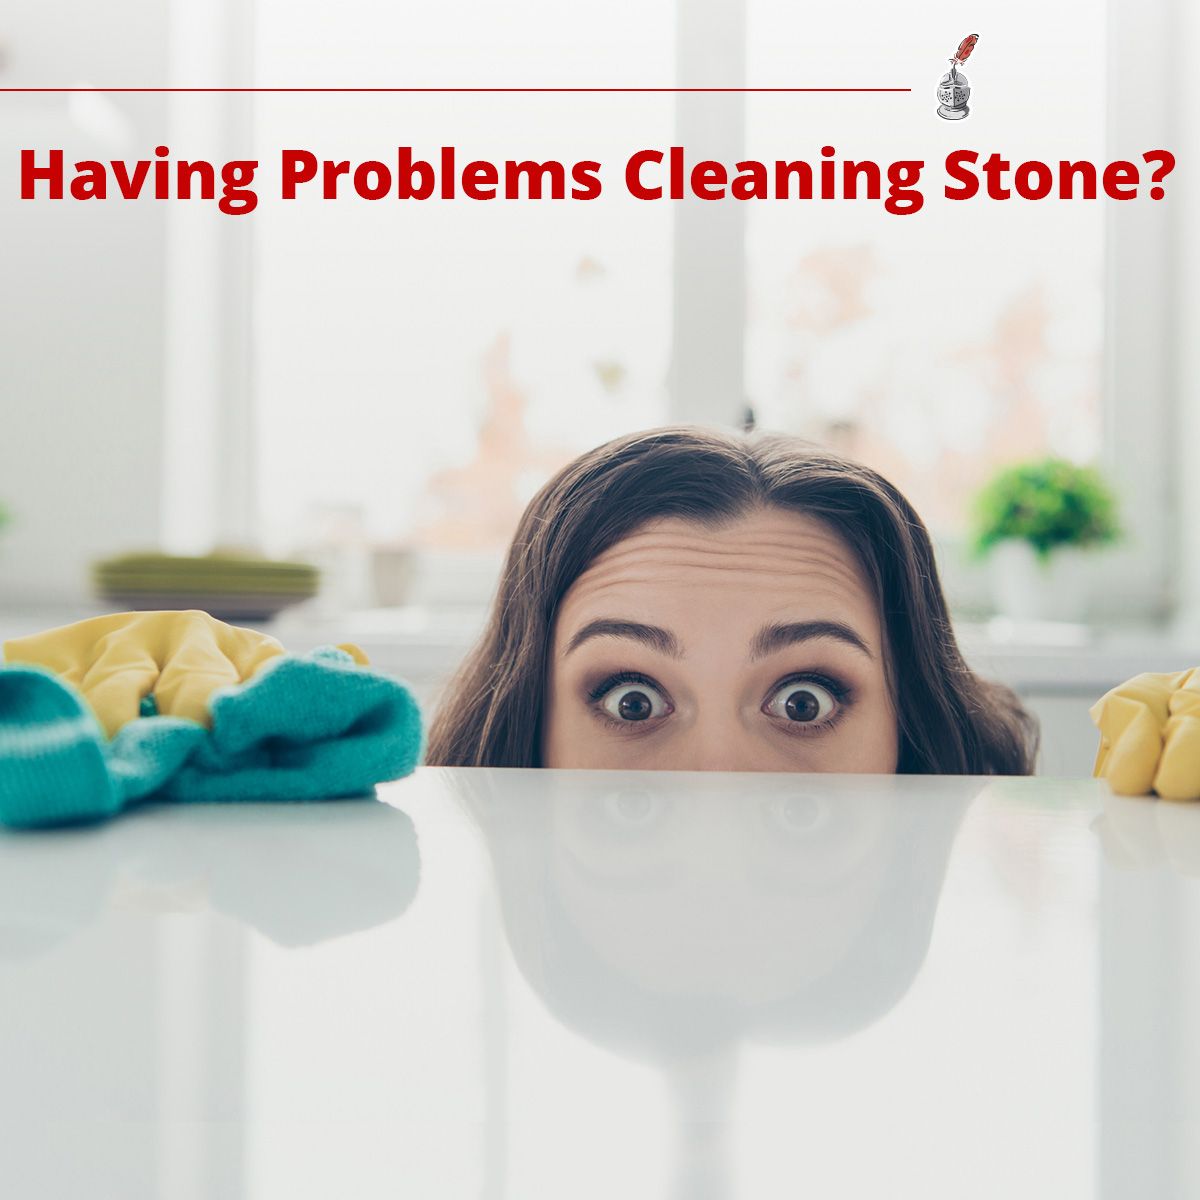 Having Problems Cleaning Stone?